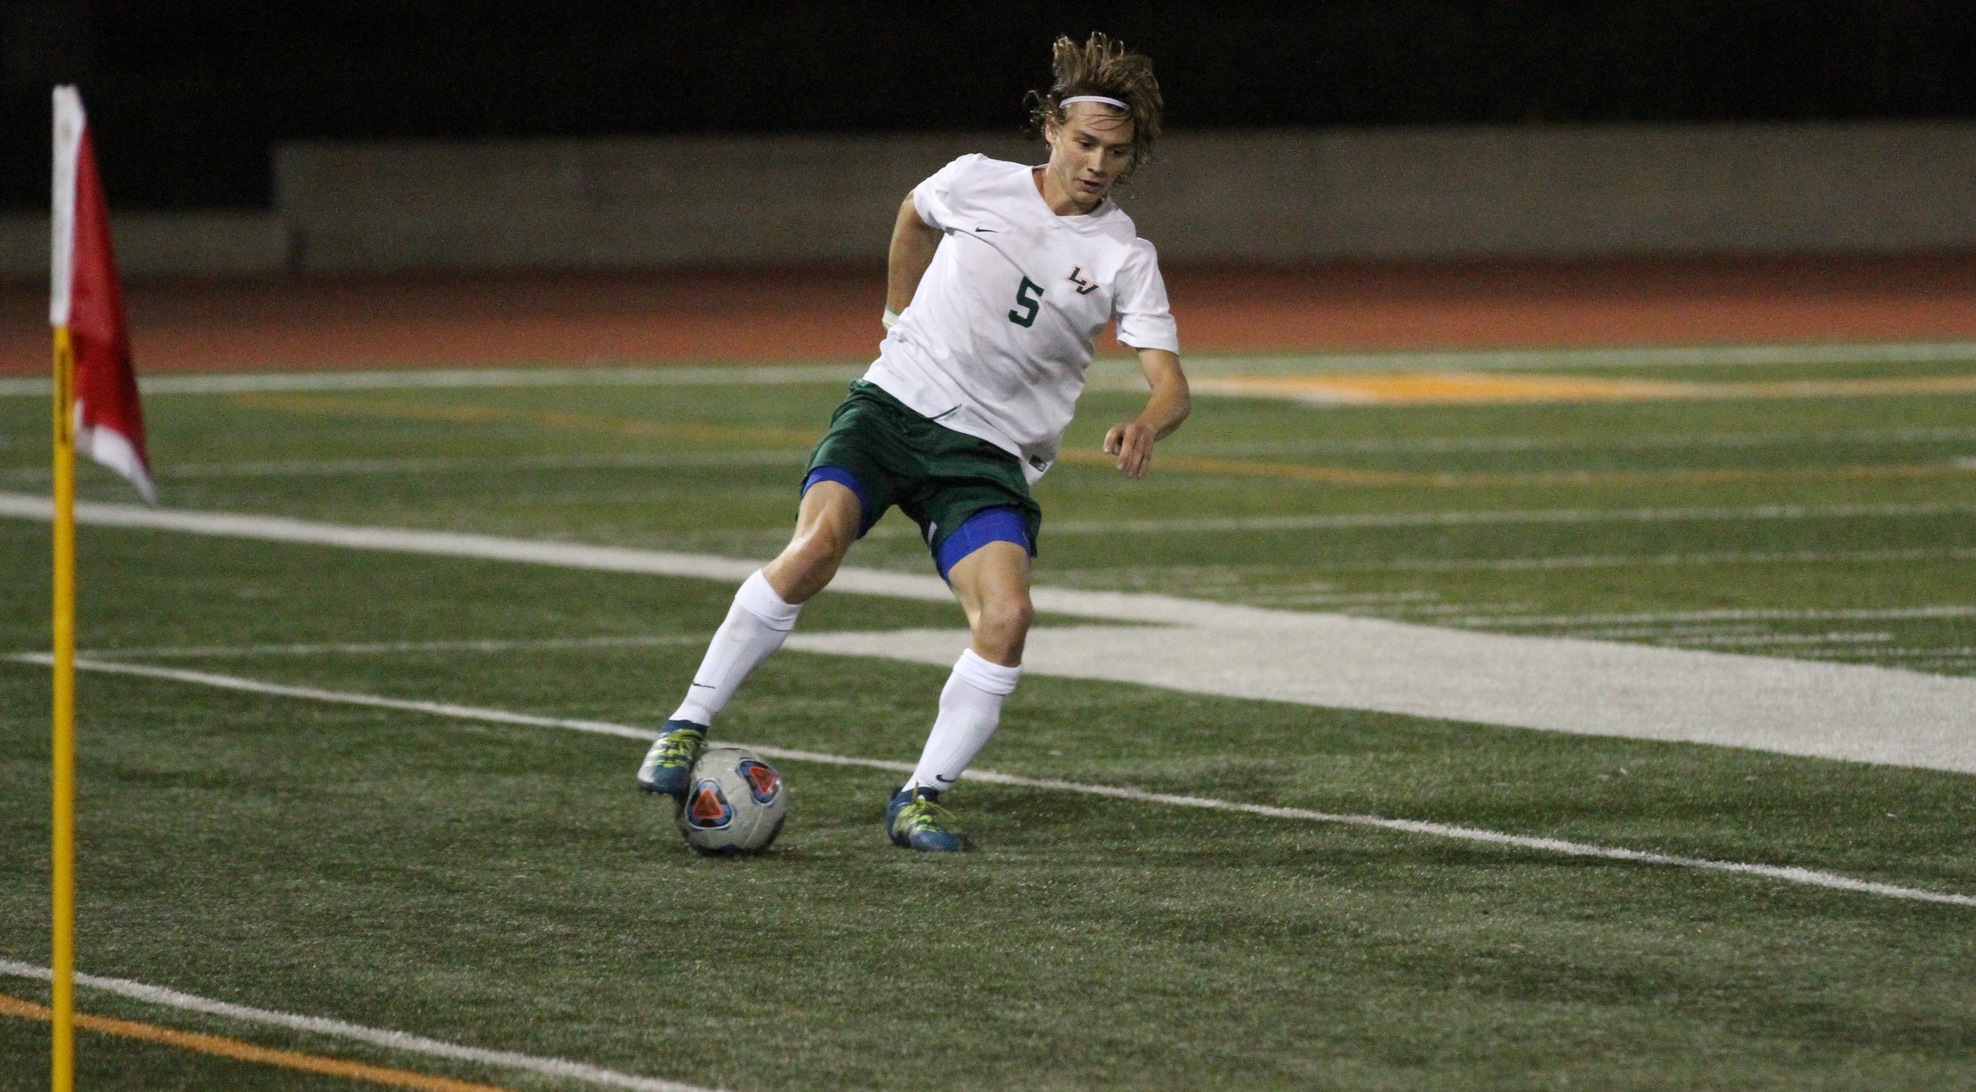 Men's Soccer cruises past Caltech at home